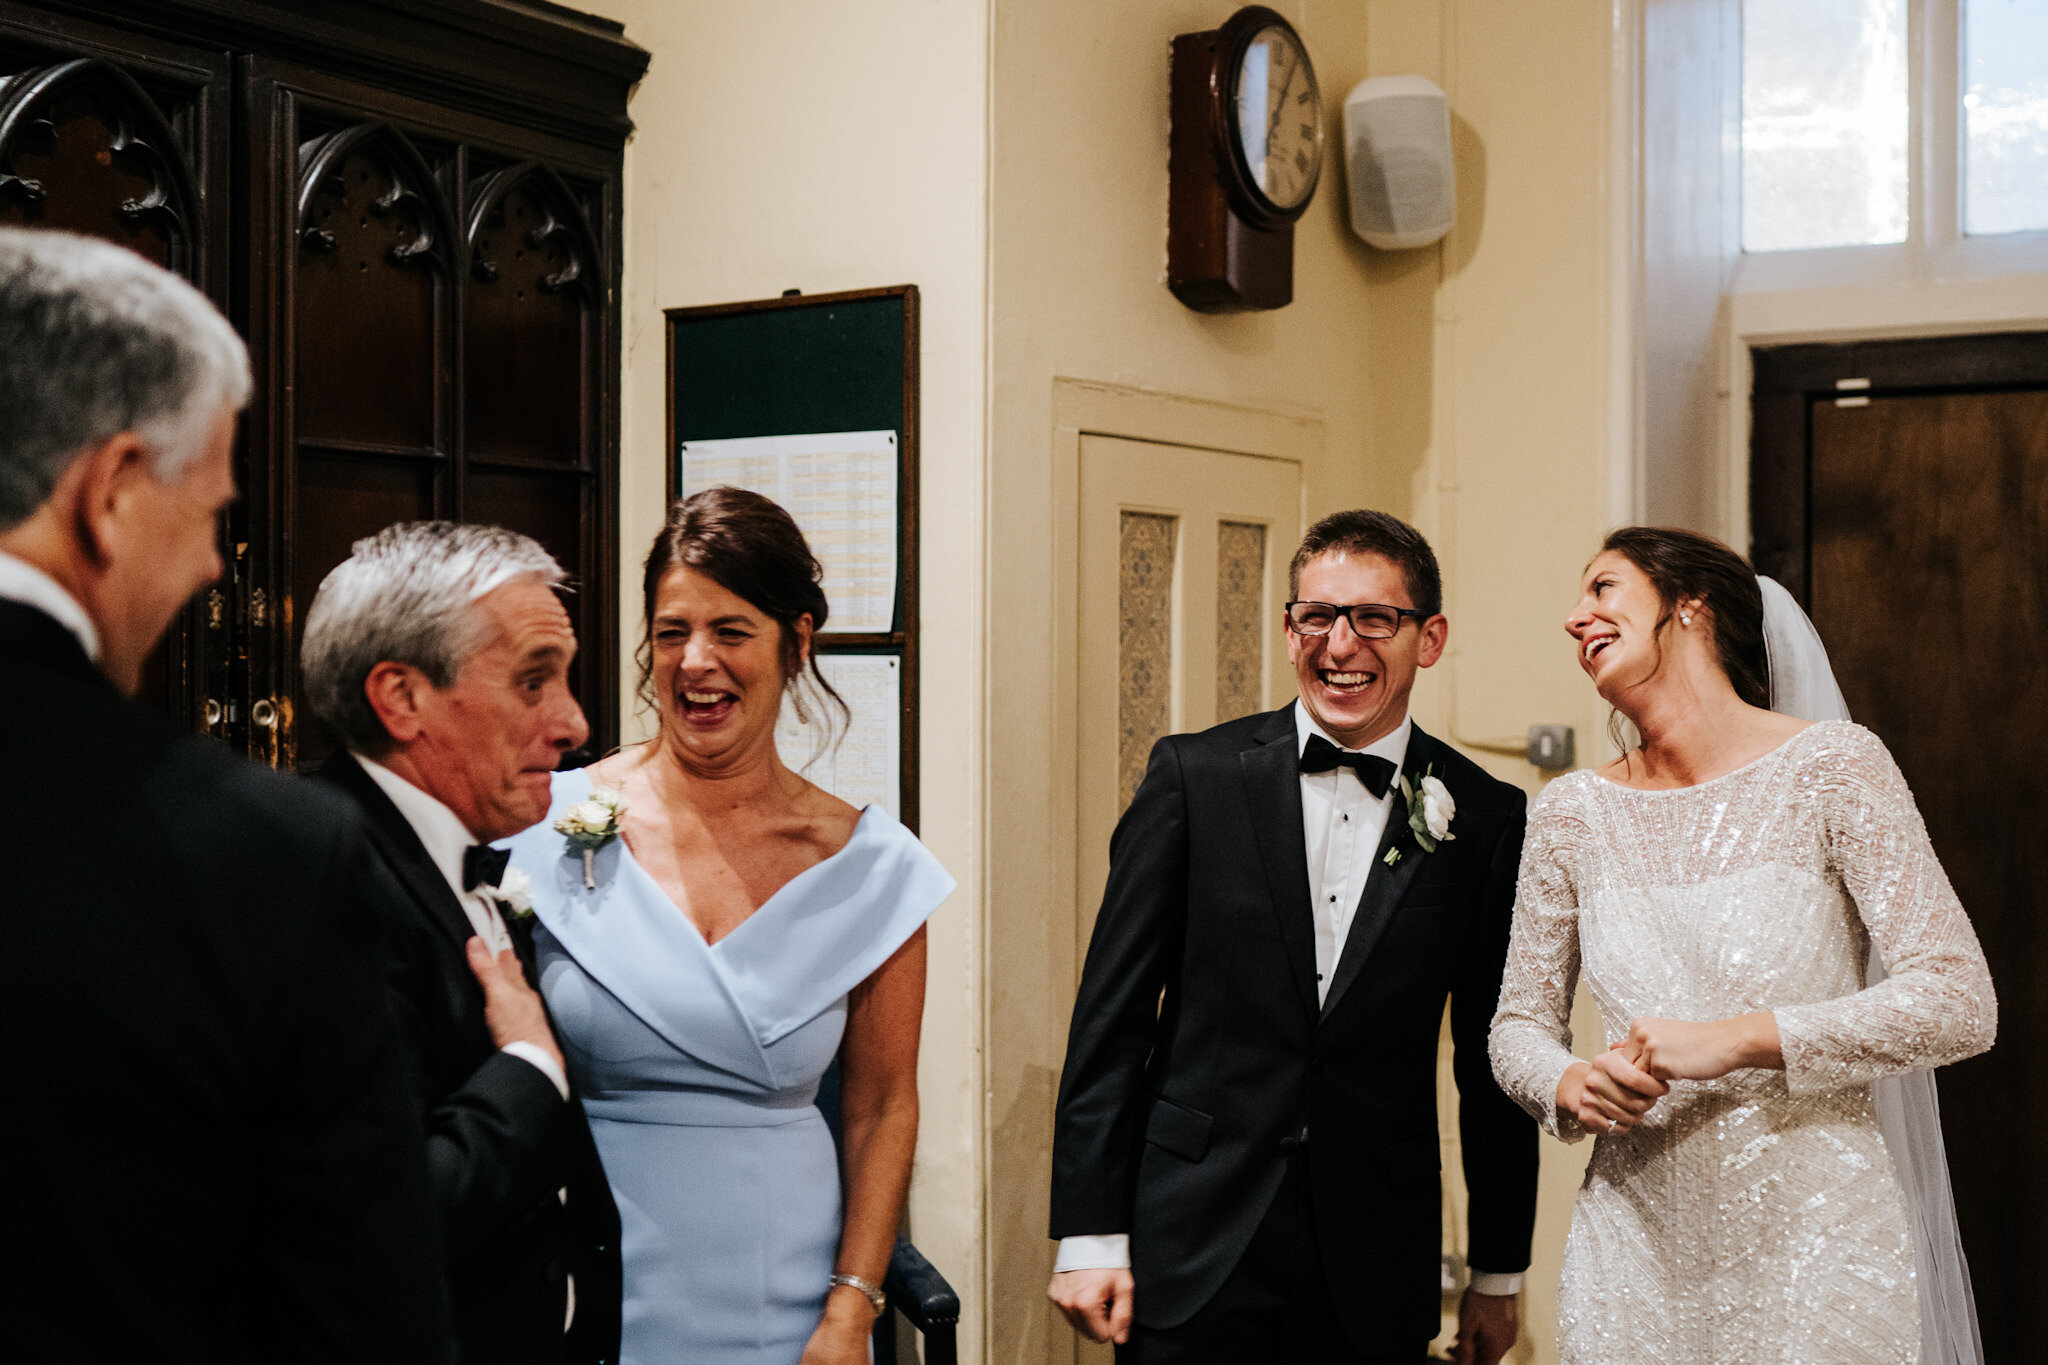 Bride, groom, bride's parents and groom's father share a moment of joy in the church moments before the register is signed